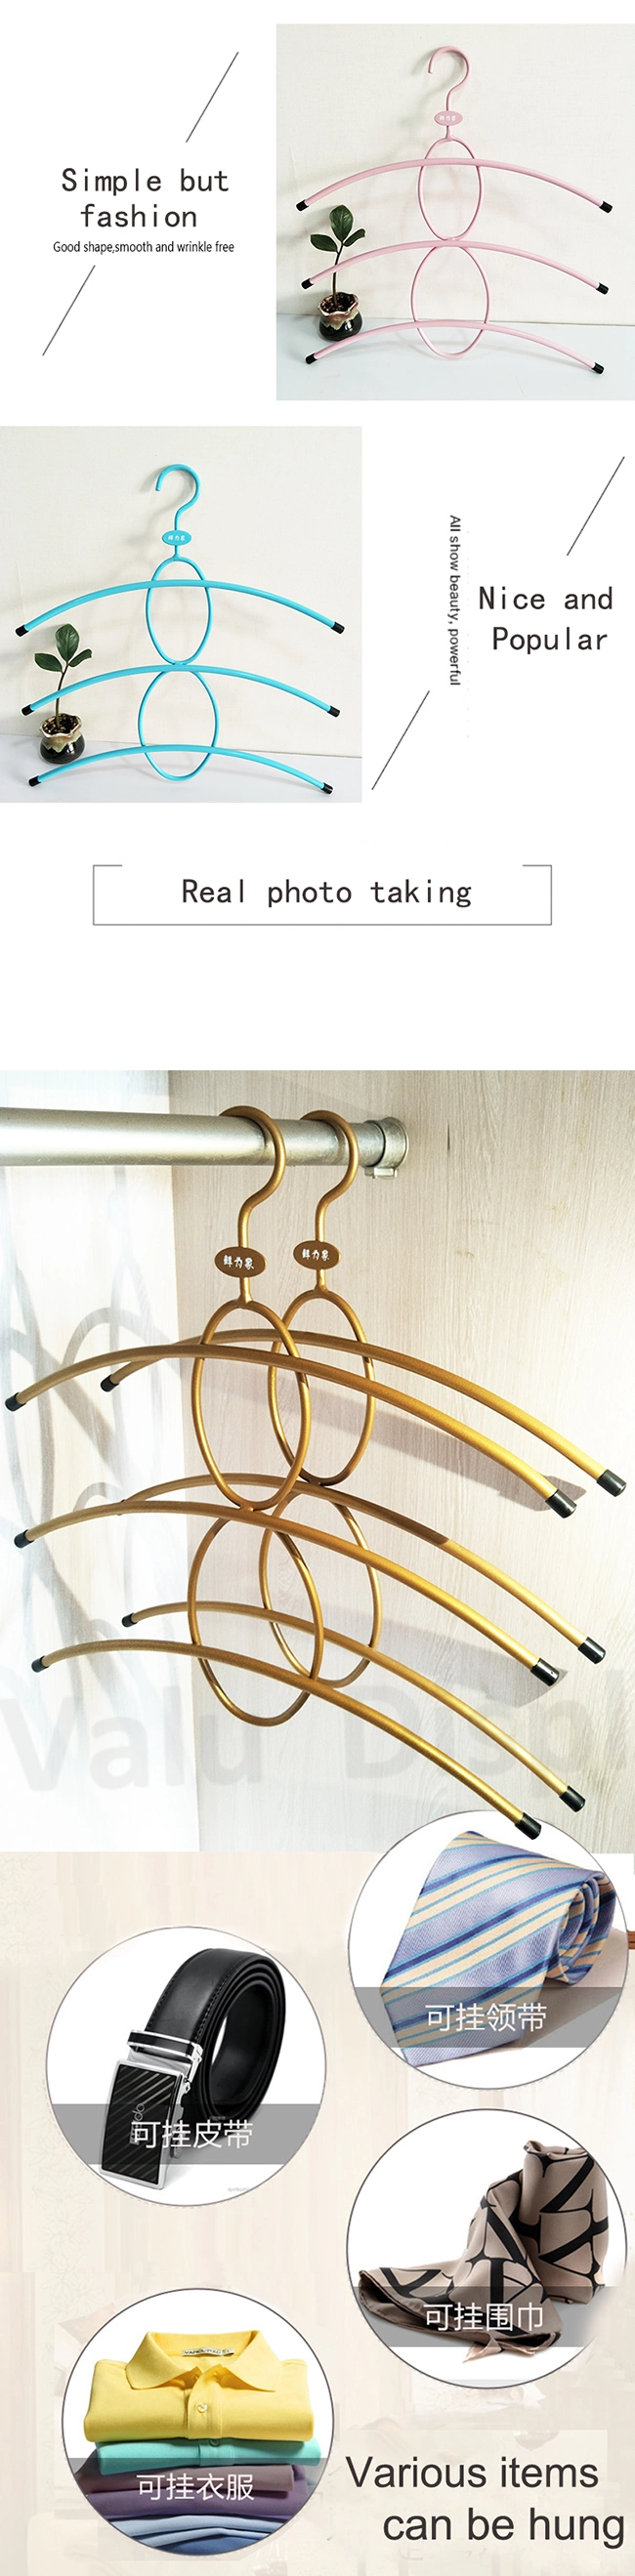 Coat Hangers, Heavy Duty Hangers, 3 Layers Space Saving Hangers Stainless Steel Hangers for Closet Organizer, 3 Pack